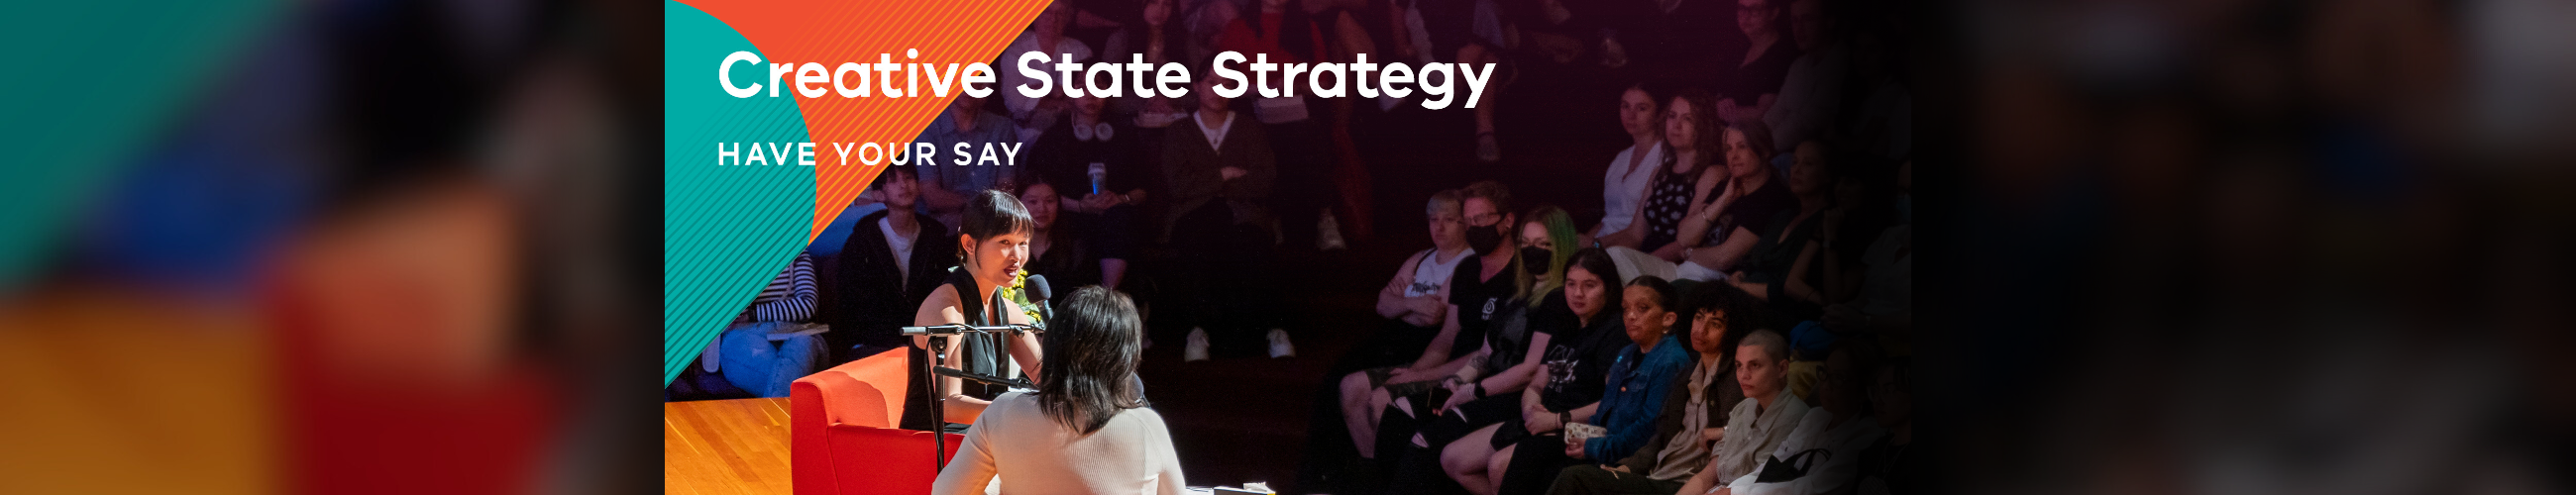 Text: Creative State Strategy, have your say. Photo of two people talking on stage with the audience looking on.